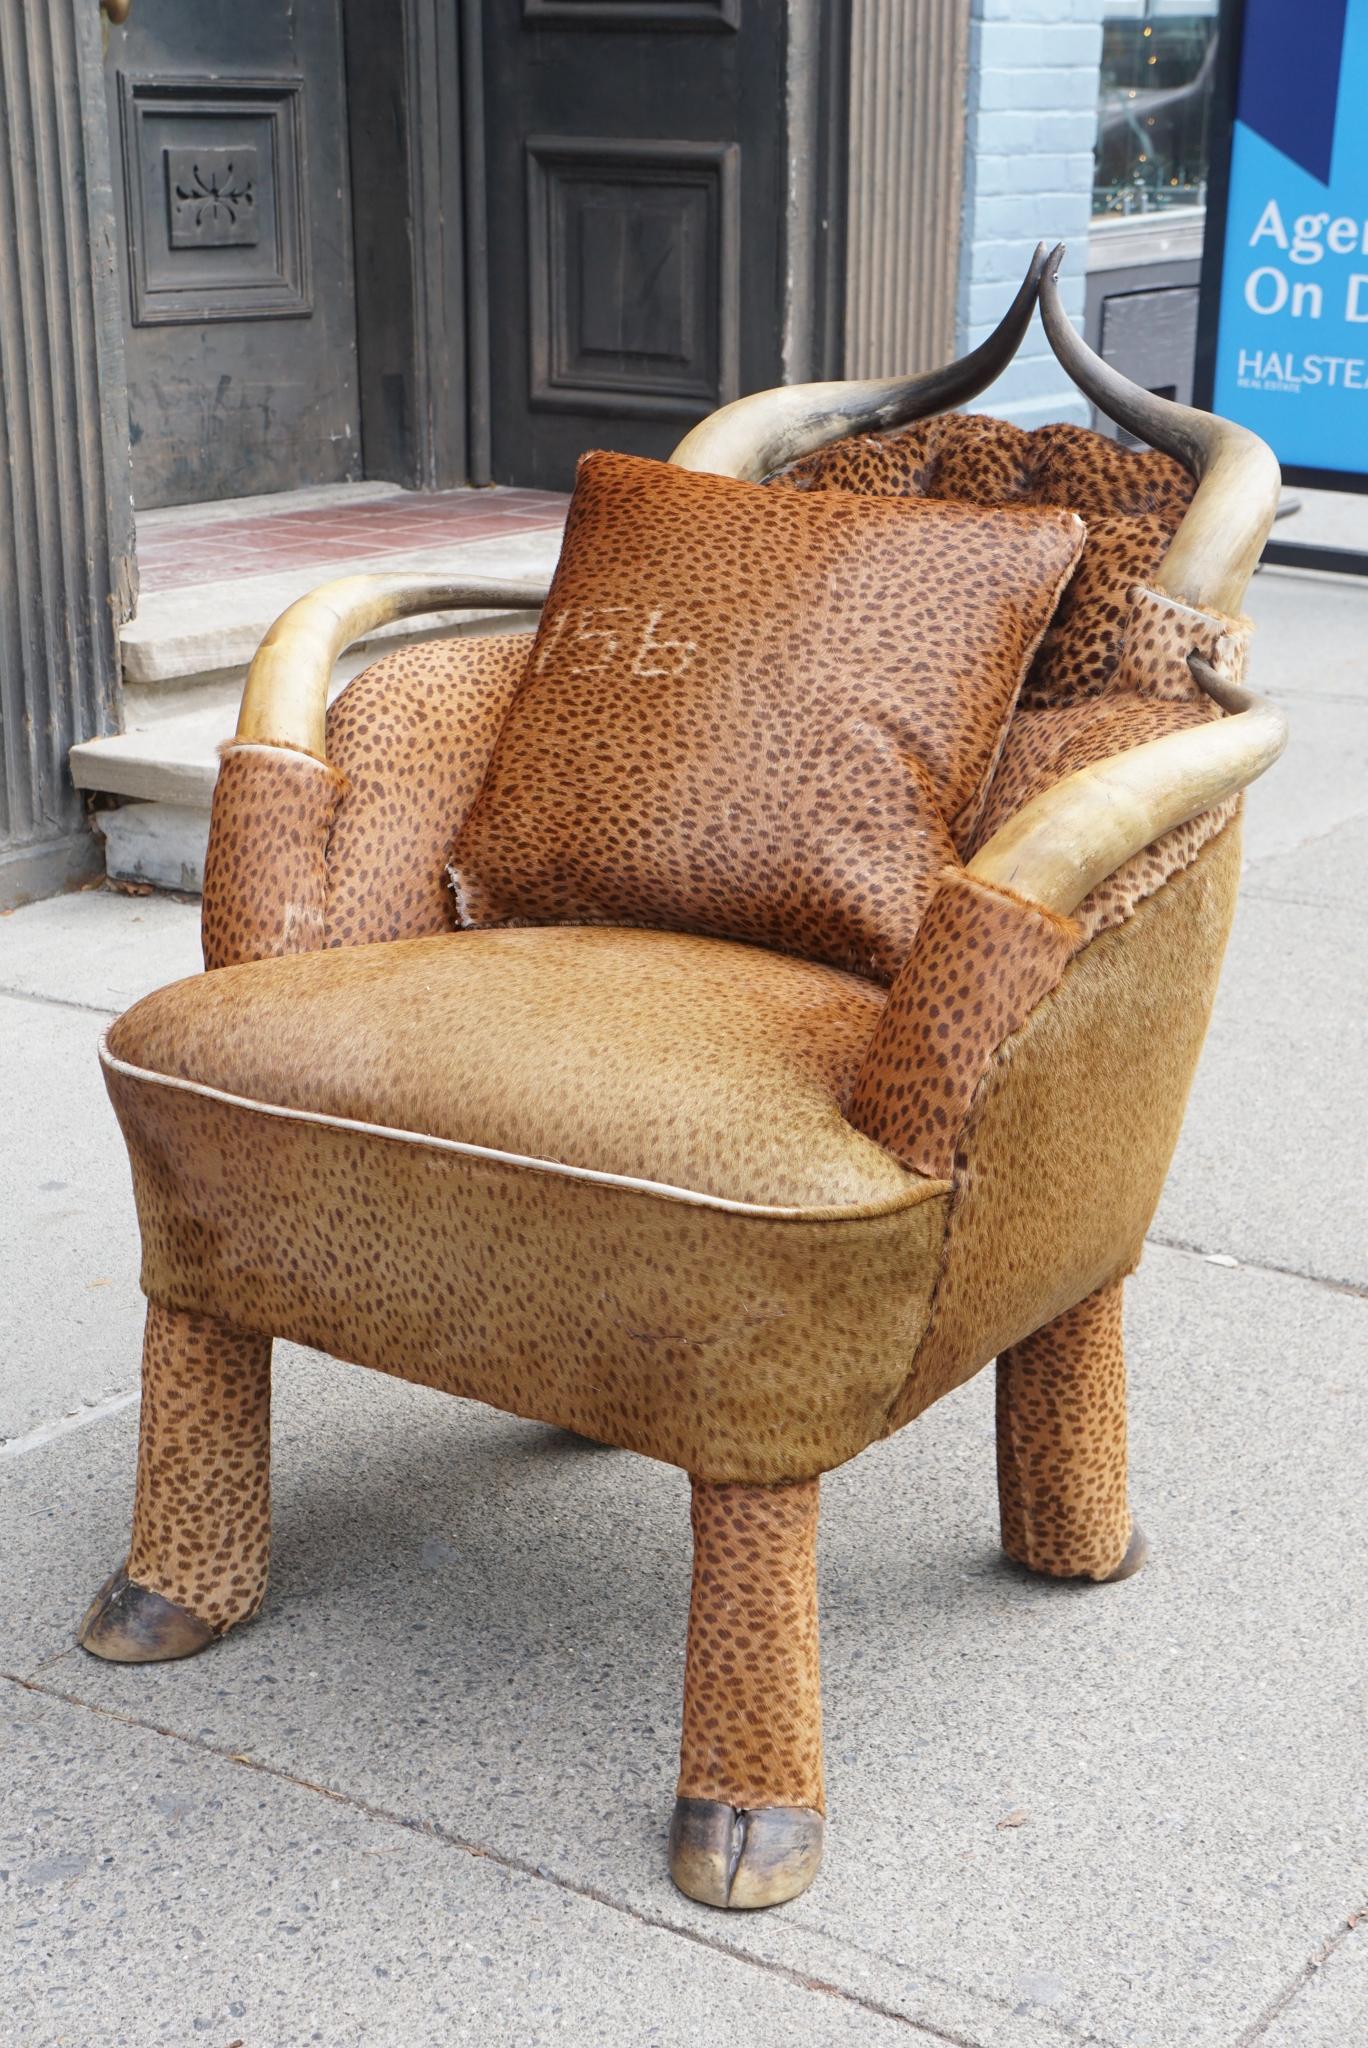 This American chair made circa 1890-1900 is constructed of steer horns with cow hoofs as legs. The chair would have been made for a ranch or camp designed as a retreat from city life for well to do citizens. The new upholstery is in a cheetah